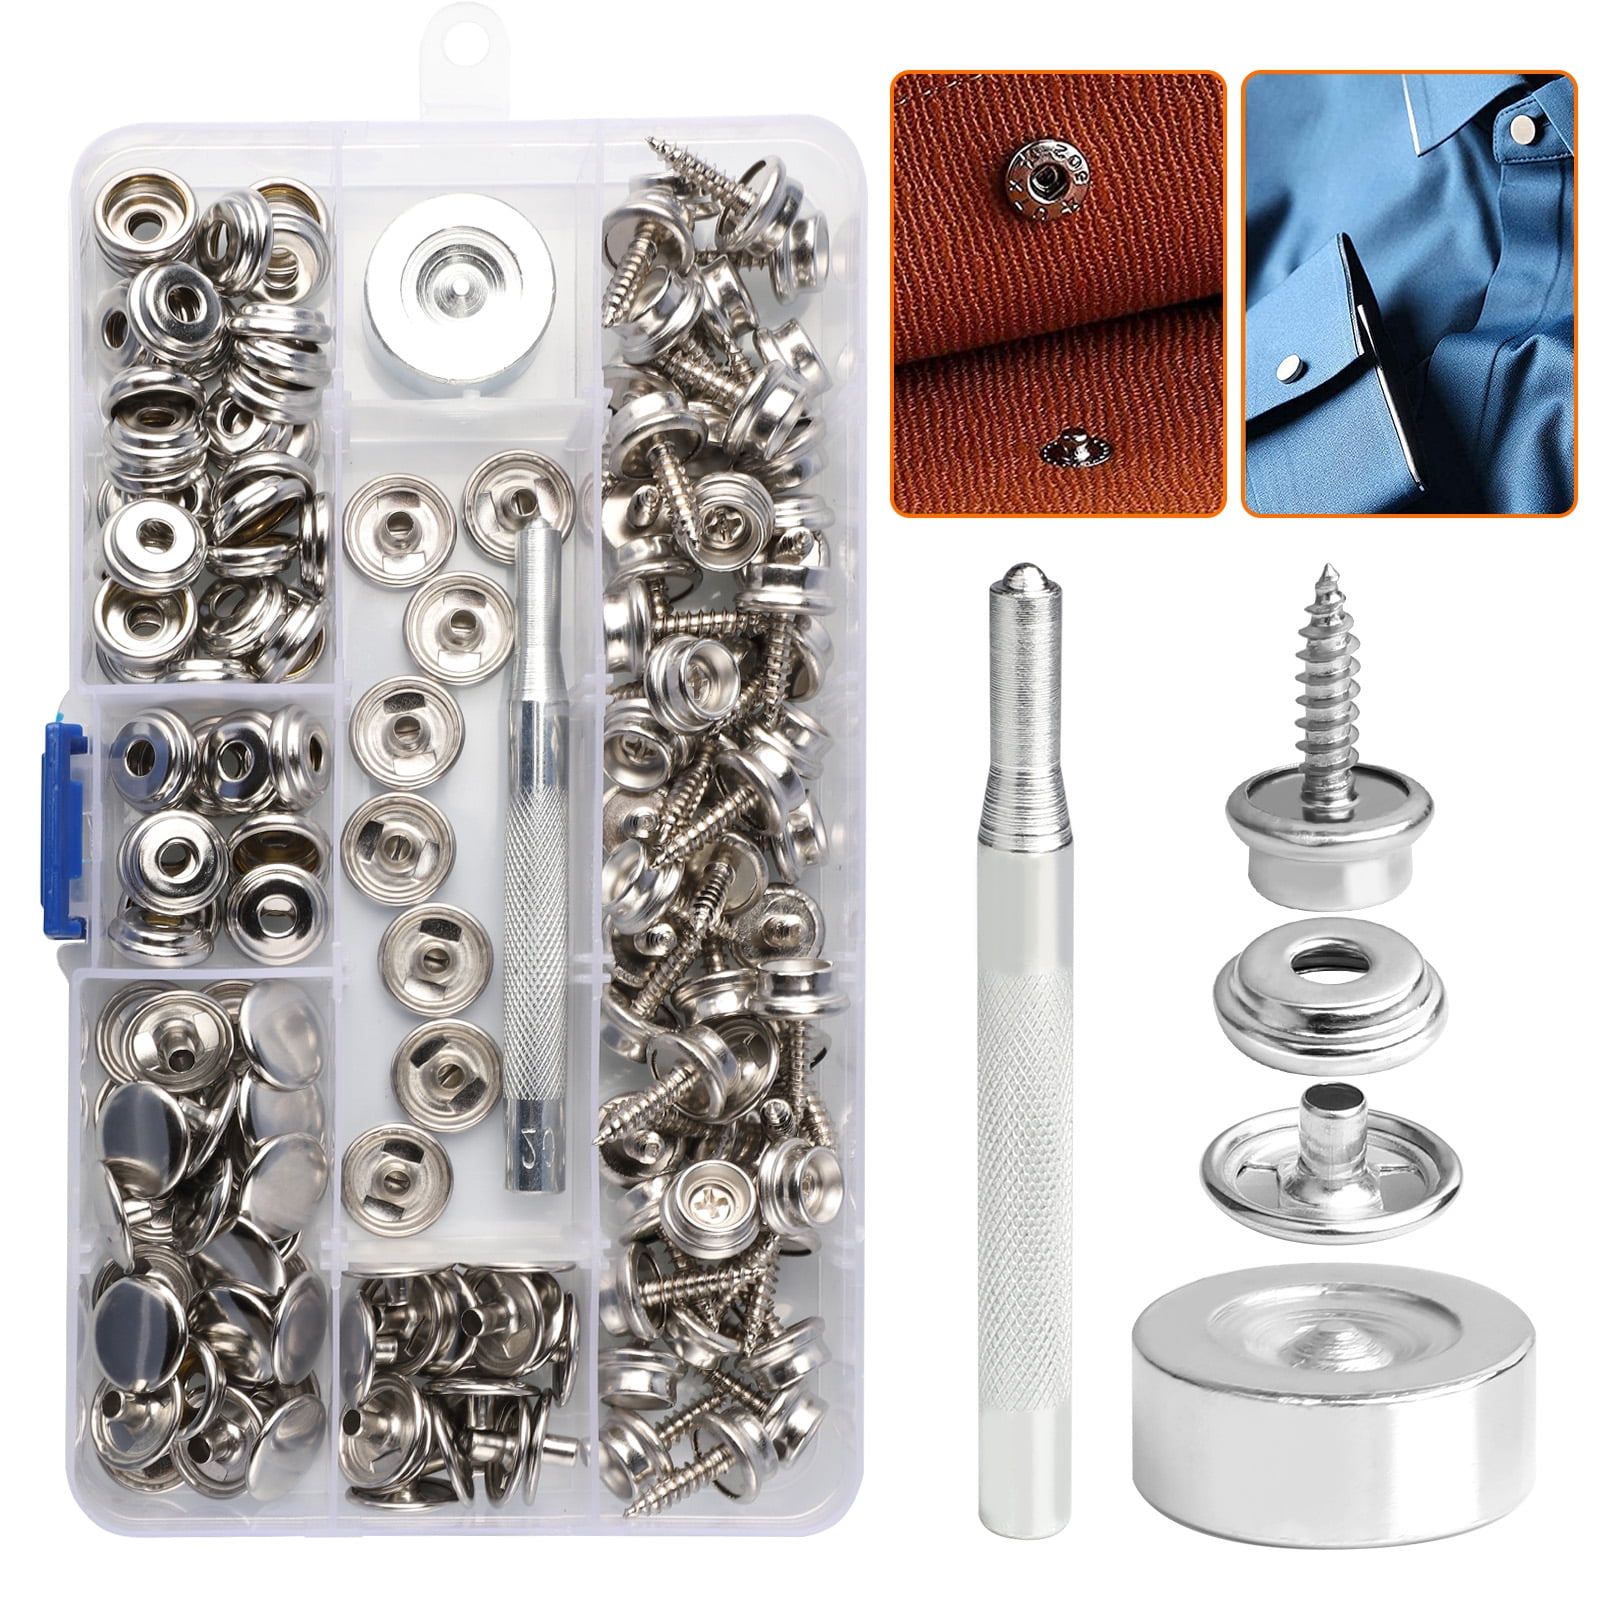 CreekCove Marine Canvas Snap Button Kit 228 Piece - Marine Grade Stainless  Steel Snaps | Fabric Base Components and Snap Tools Included | DIY Canvas